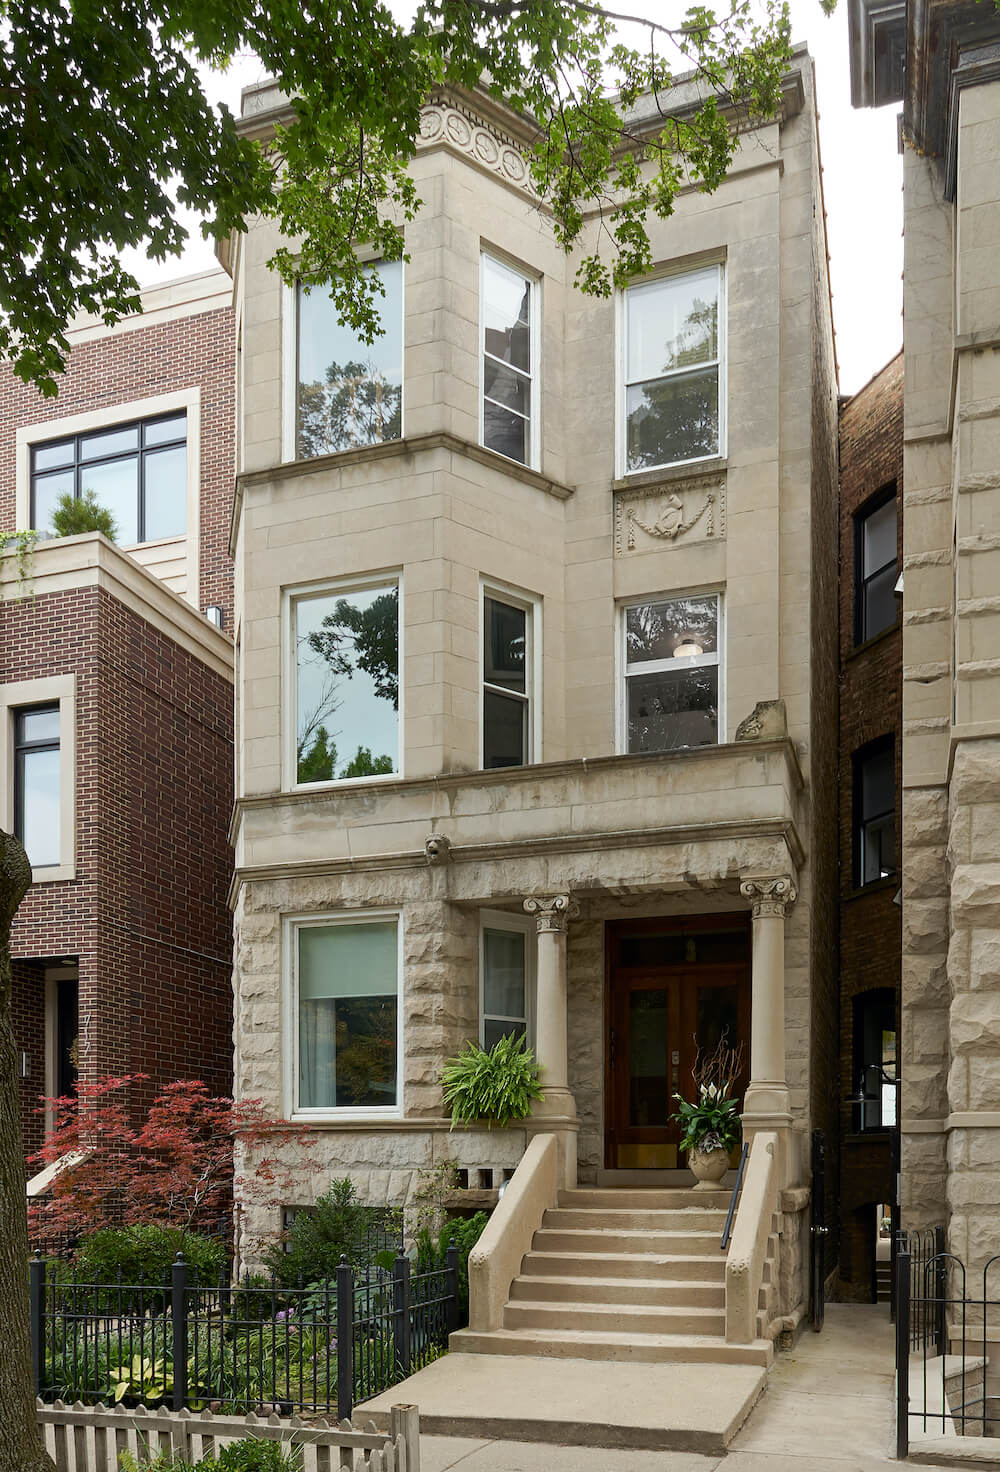 Exterior of the home in Chicago